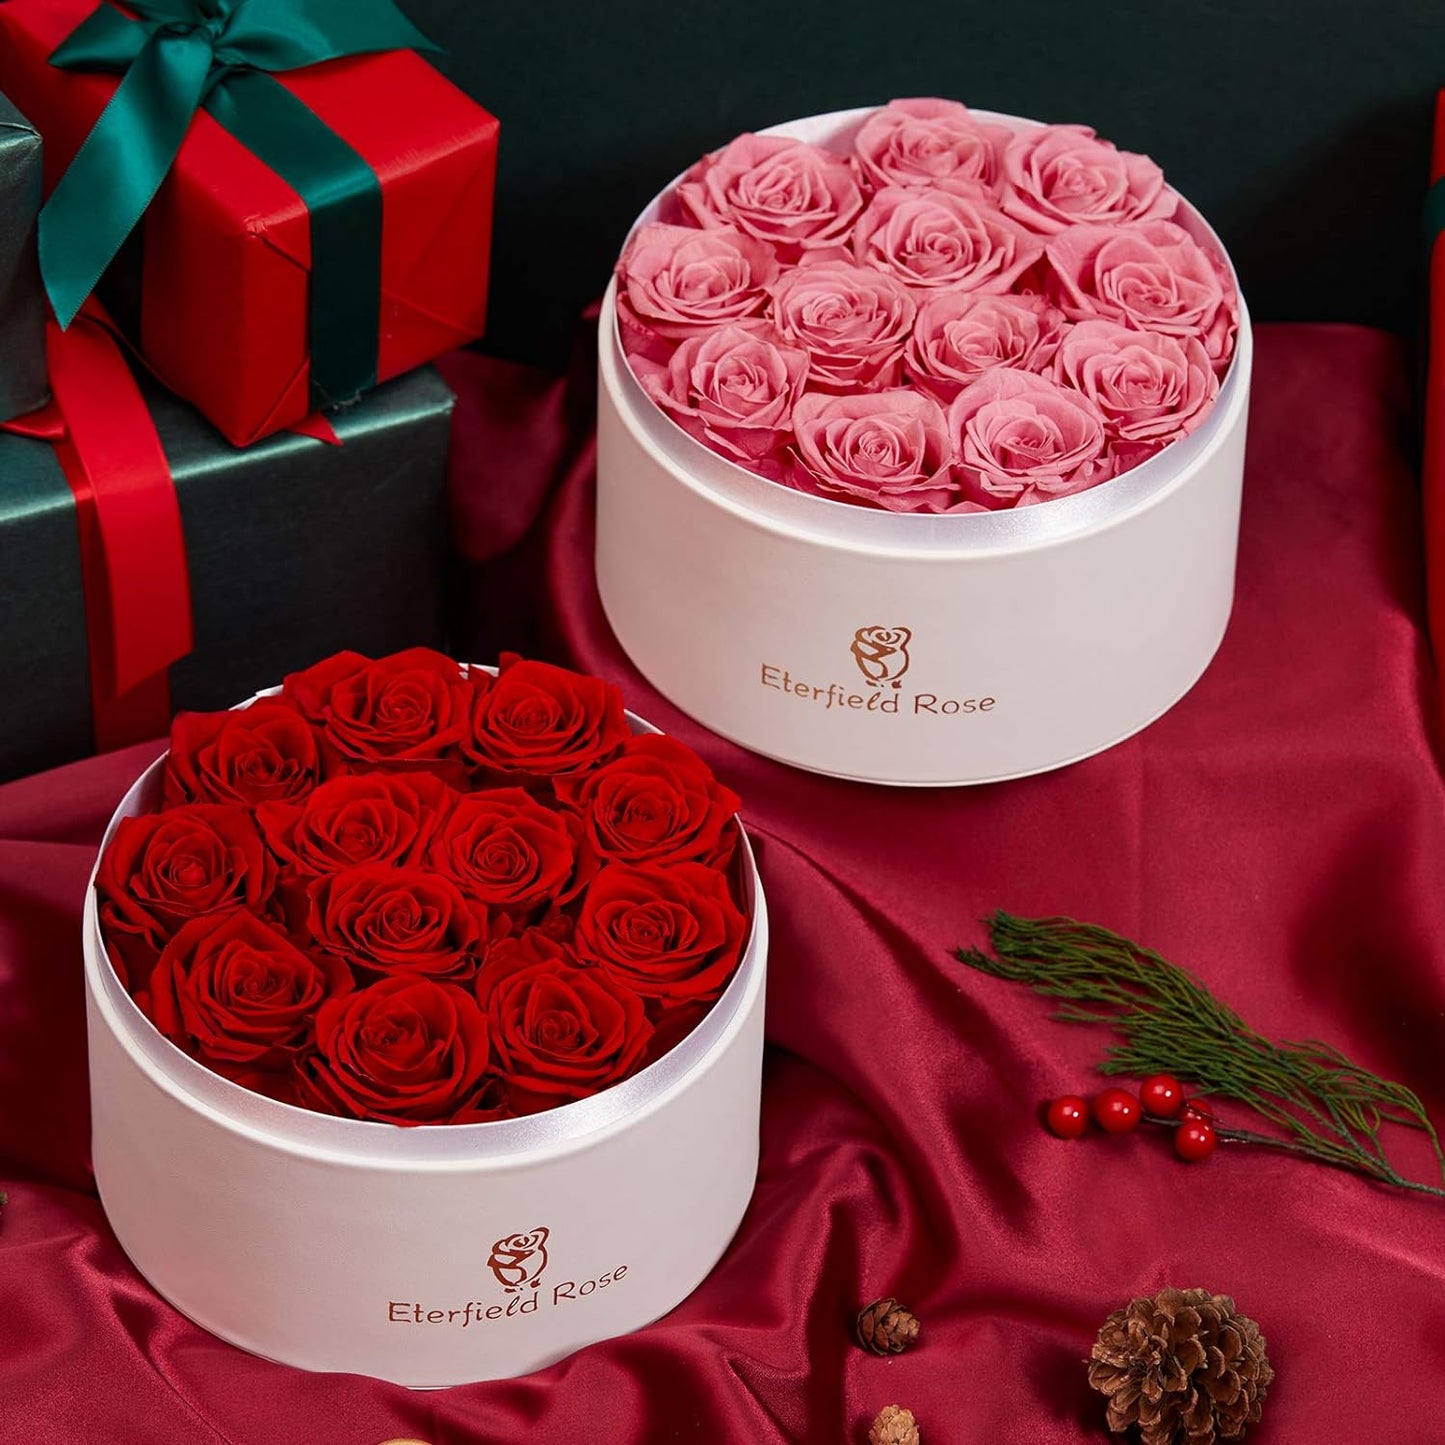 12 Preserved Rose in a Box Real Roses That Last a Year Preserved Flowers for Delivery Prime Gift for Her Valentines Day Mother Day (Red Roses, round White PU Leather Box)